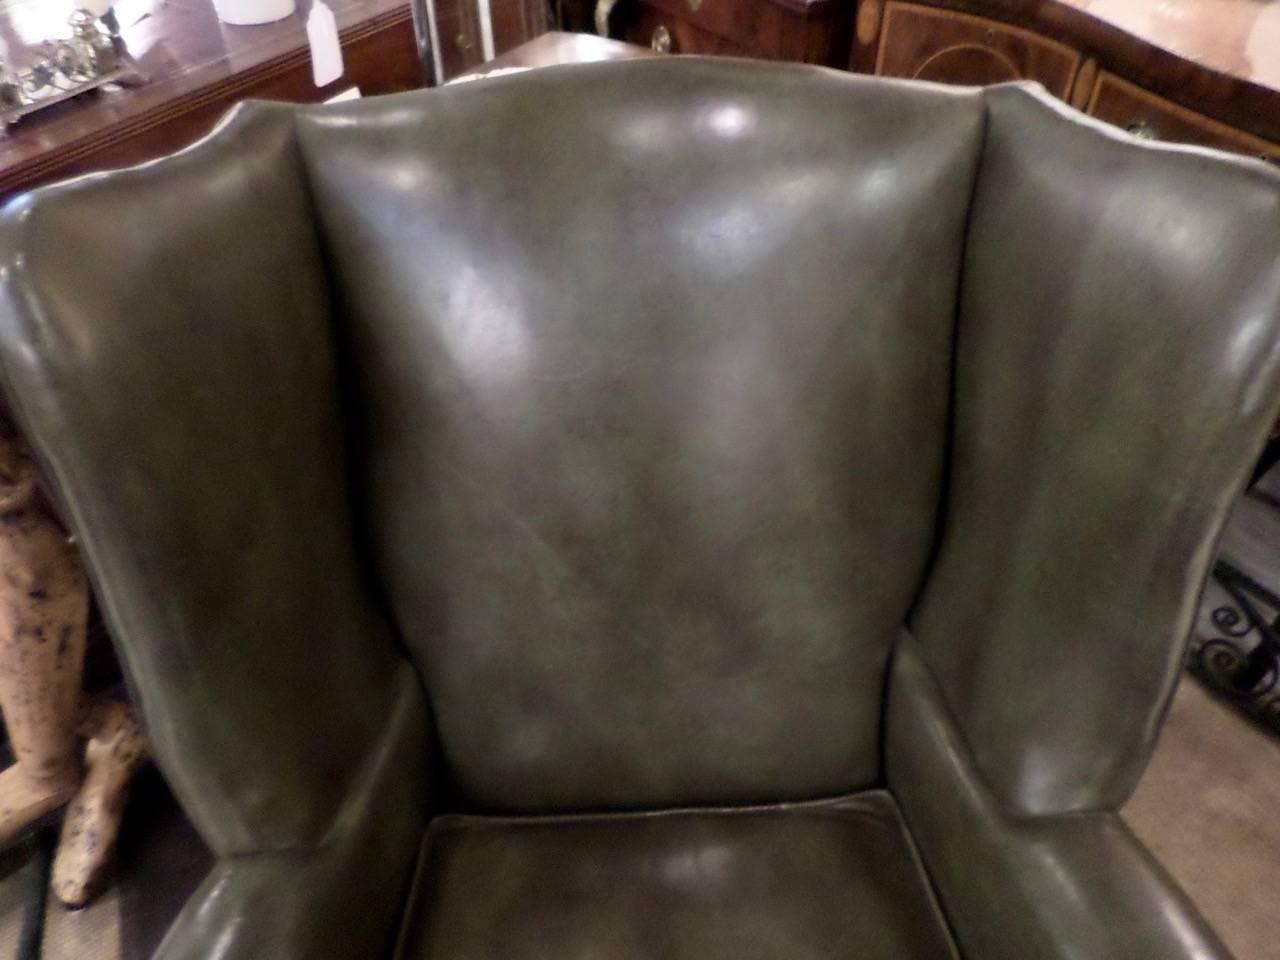 
Vintage Chippendale style wing chair in pale green leather with matching ottoman with brass tack trim. Minor wear on the chair and some cracking on the ottoman, commensurate with age.
The exposed wood frame is mahogany. Both pieces are labeled